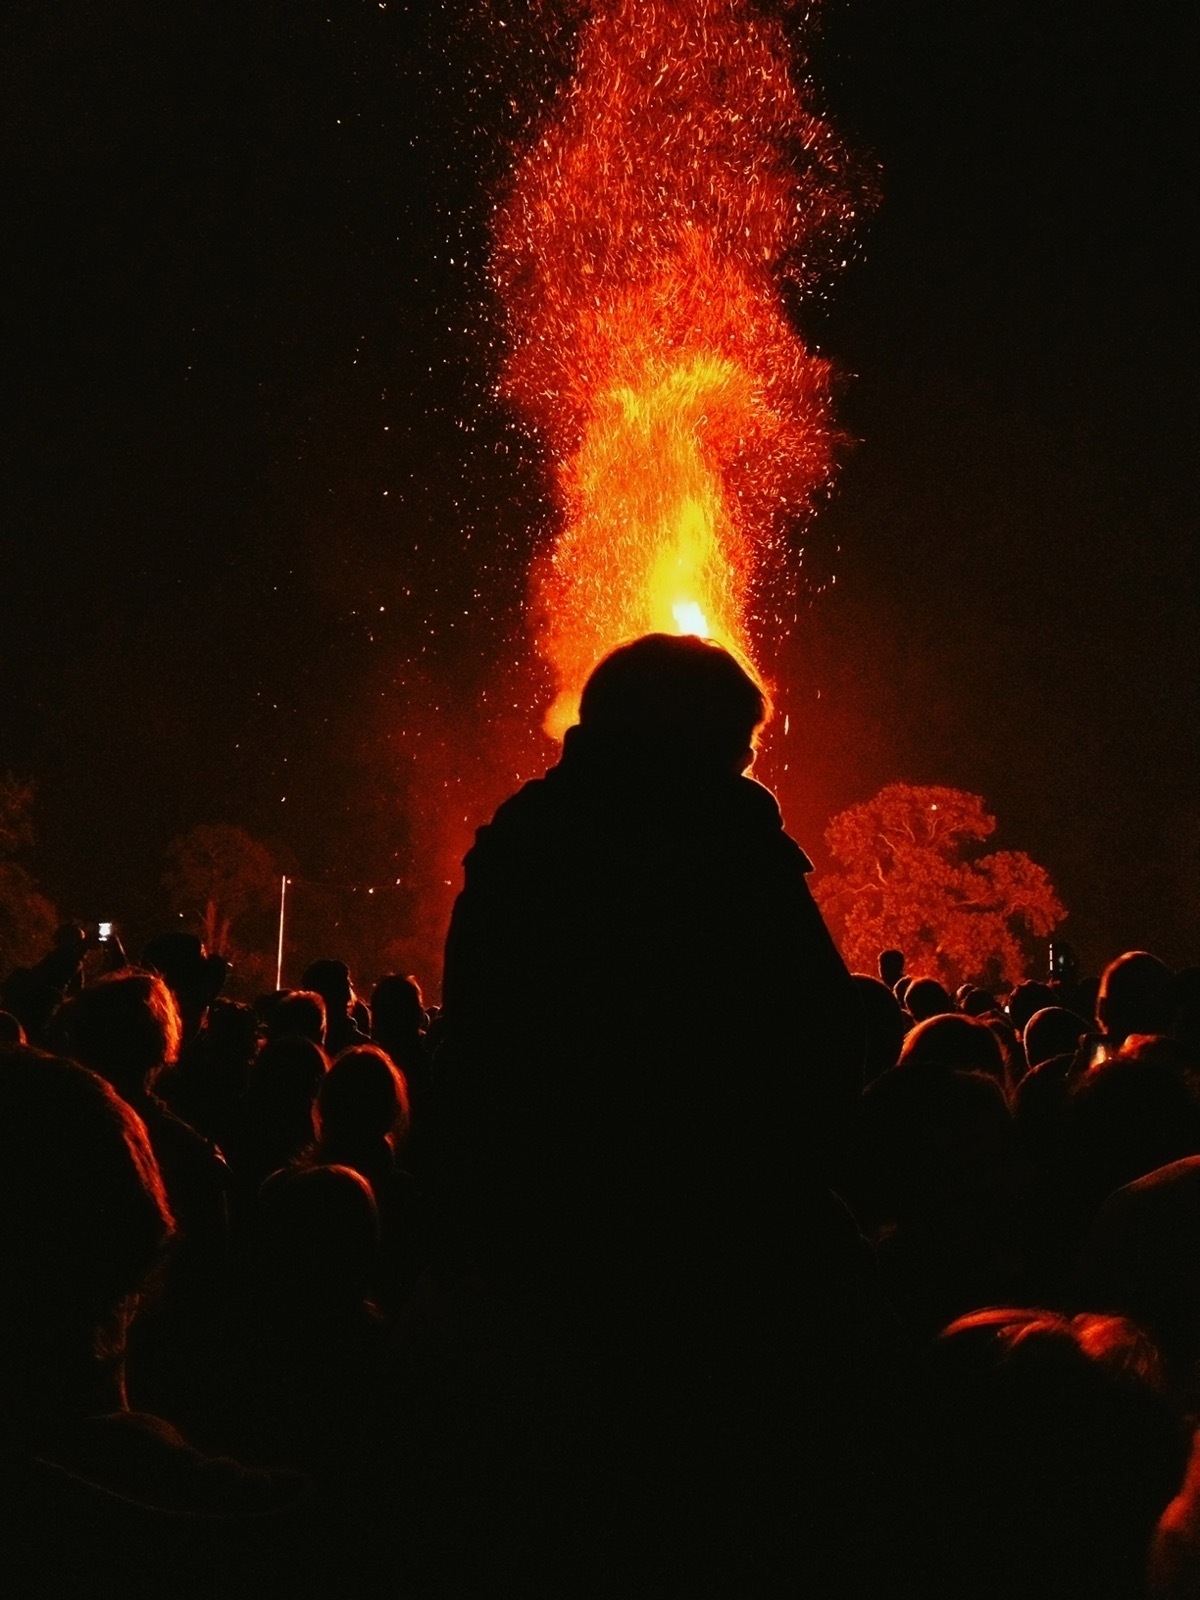 Silhouette of a boy on a man's shoulders above a crowd of people, in front of a plume of sparks from a bonfire